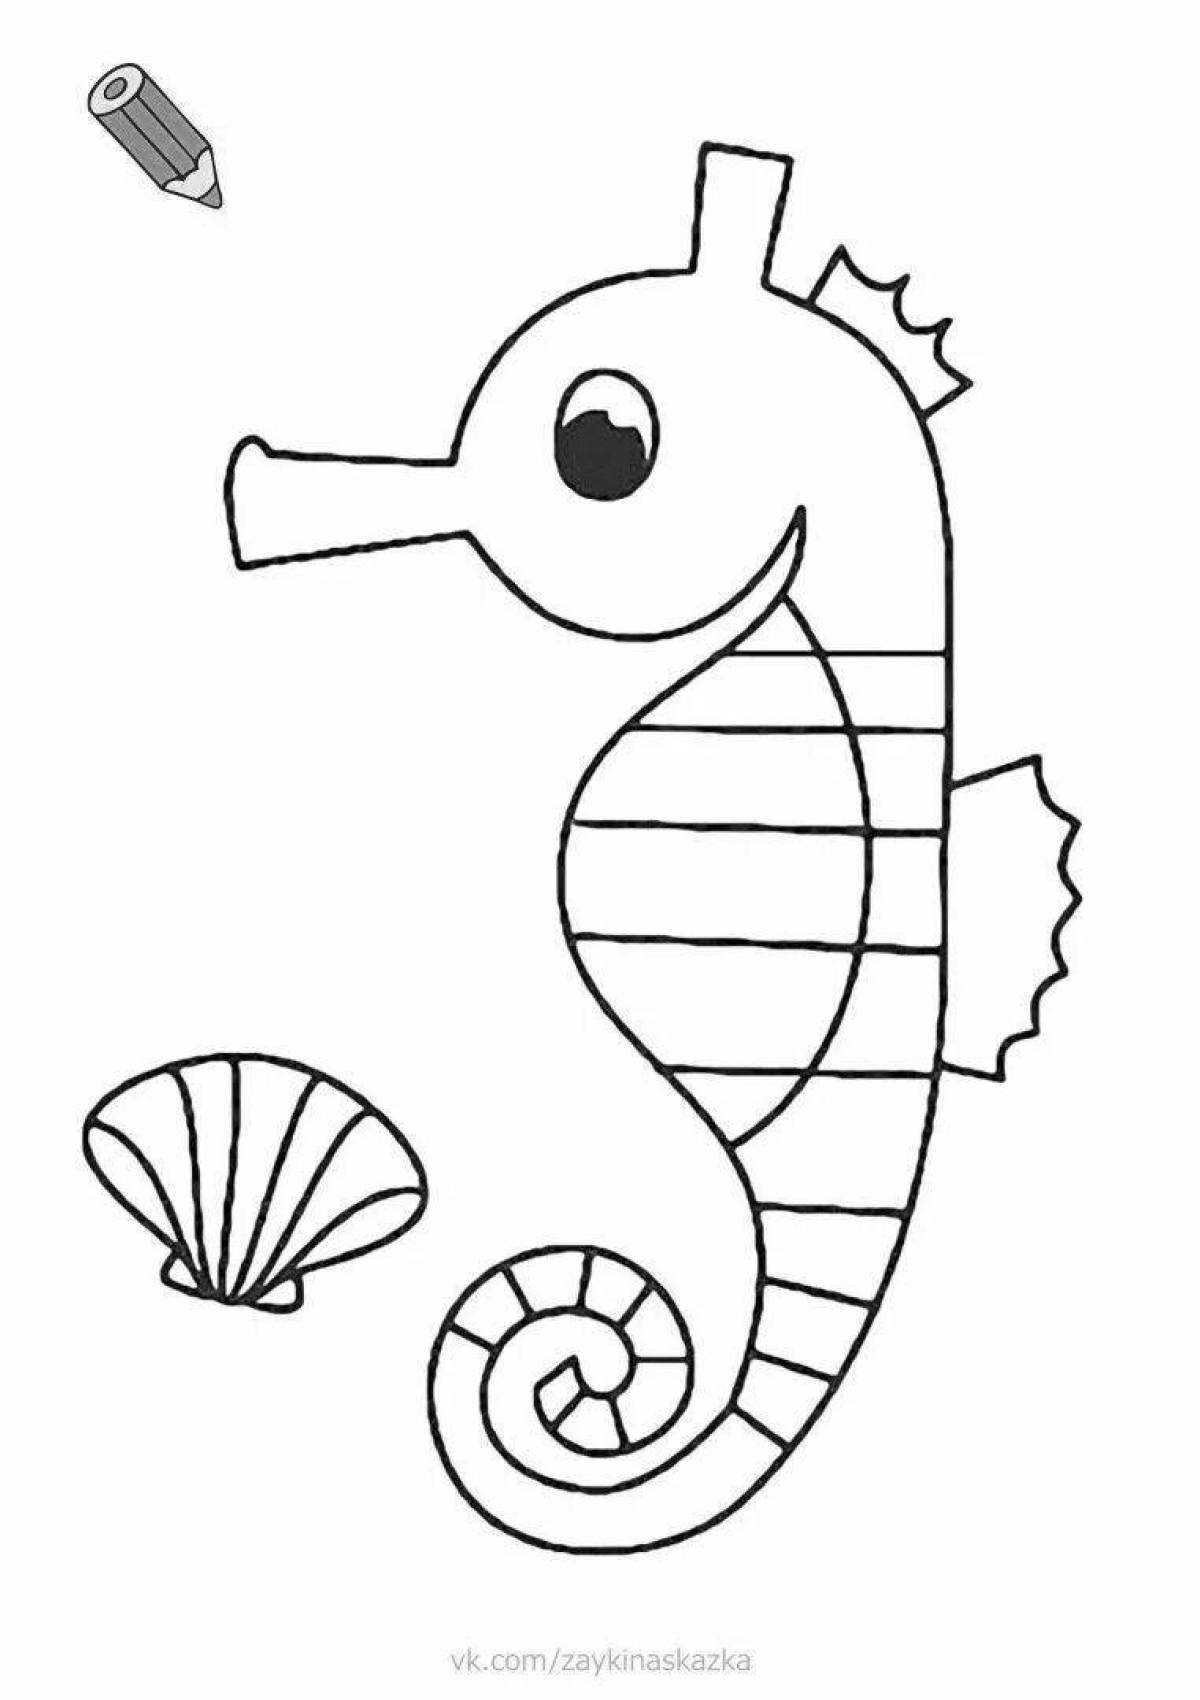 Adorable seahorse coloring page for kids